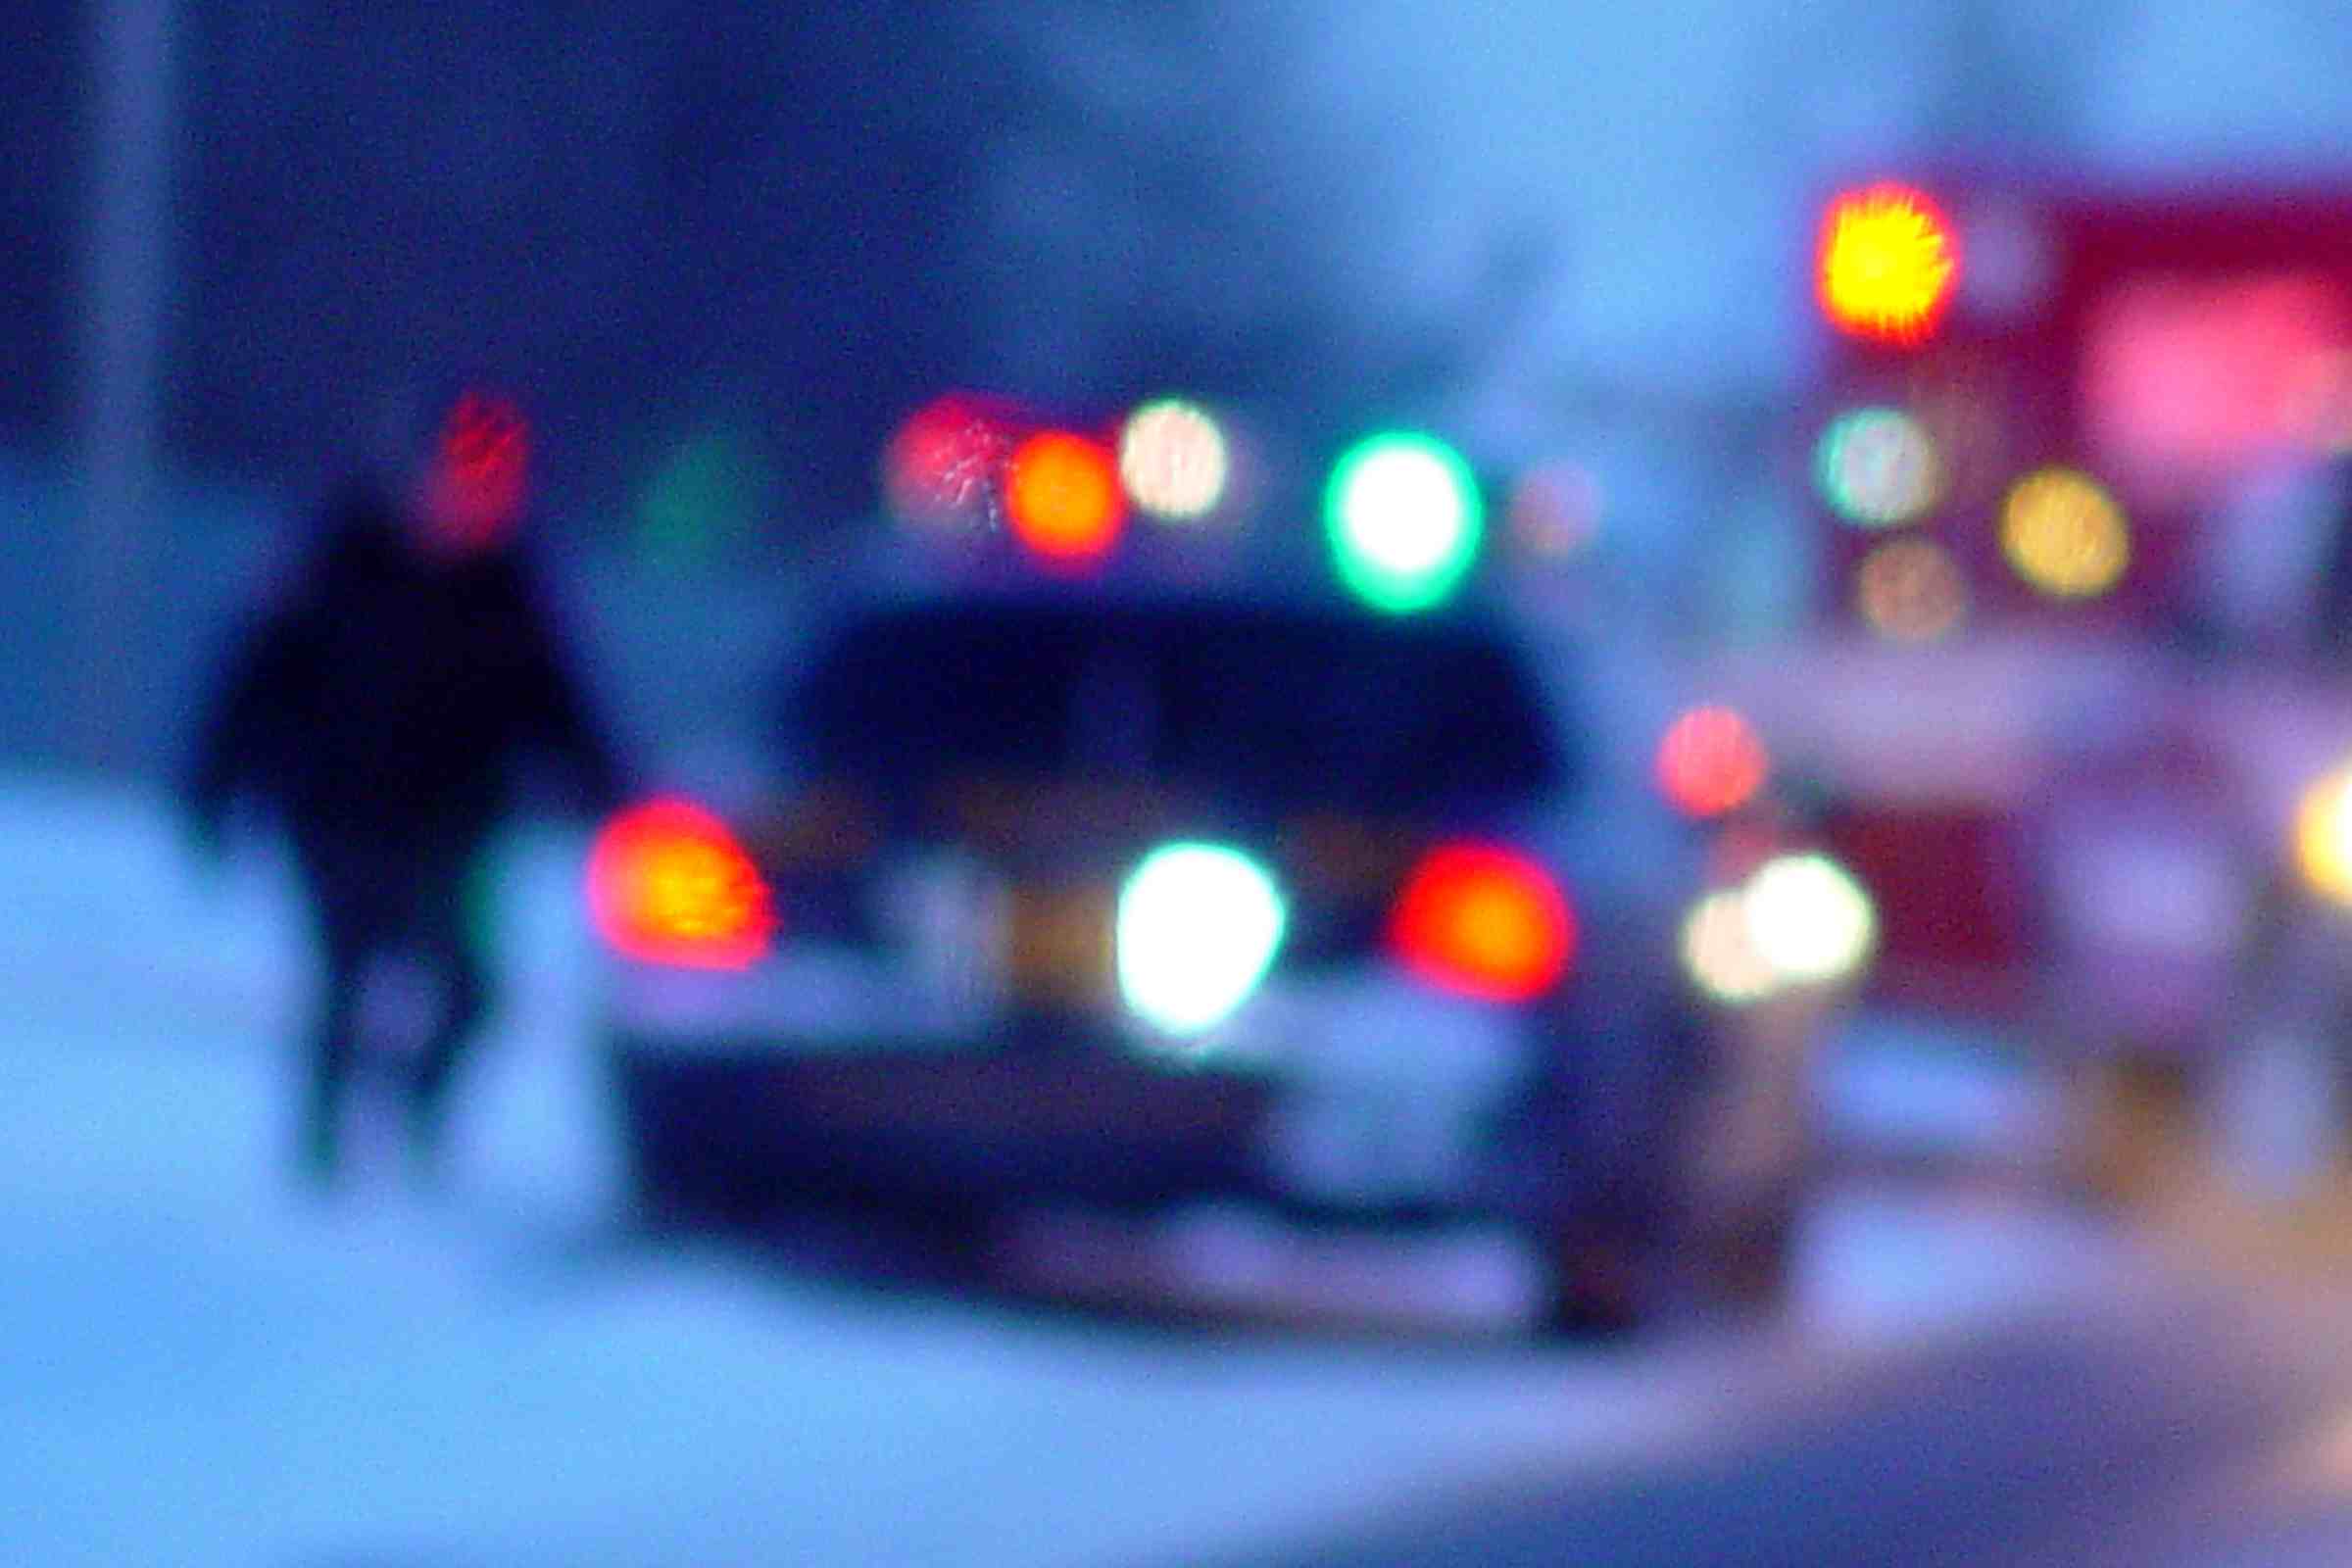 A common cause of car accidents in the winter is a condition called black ice.